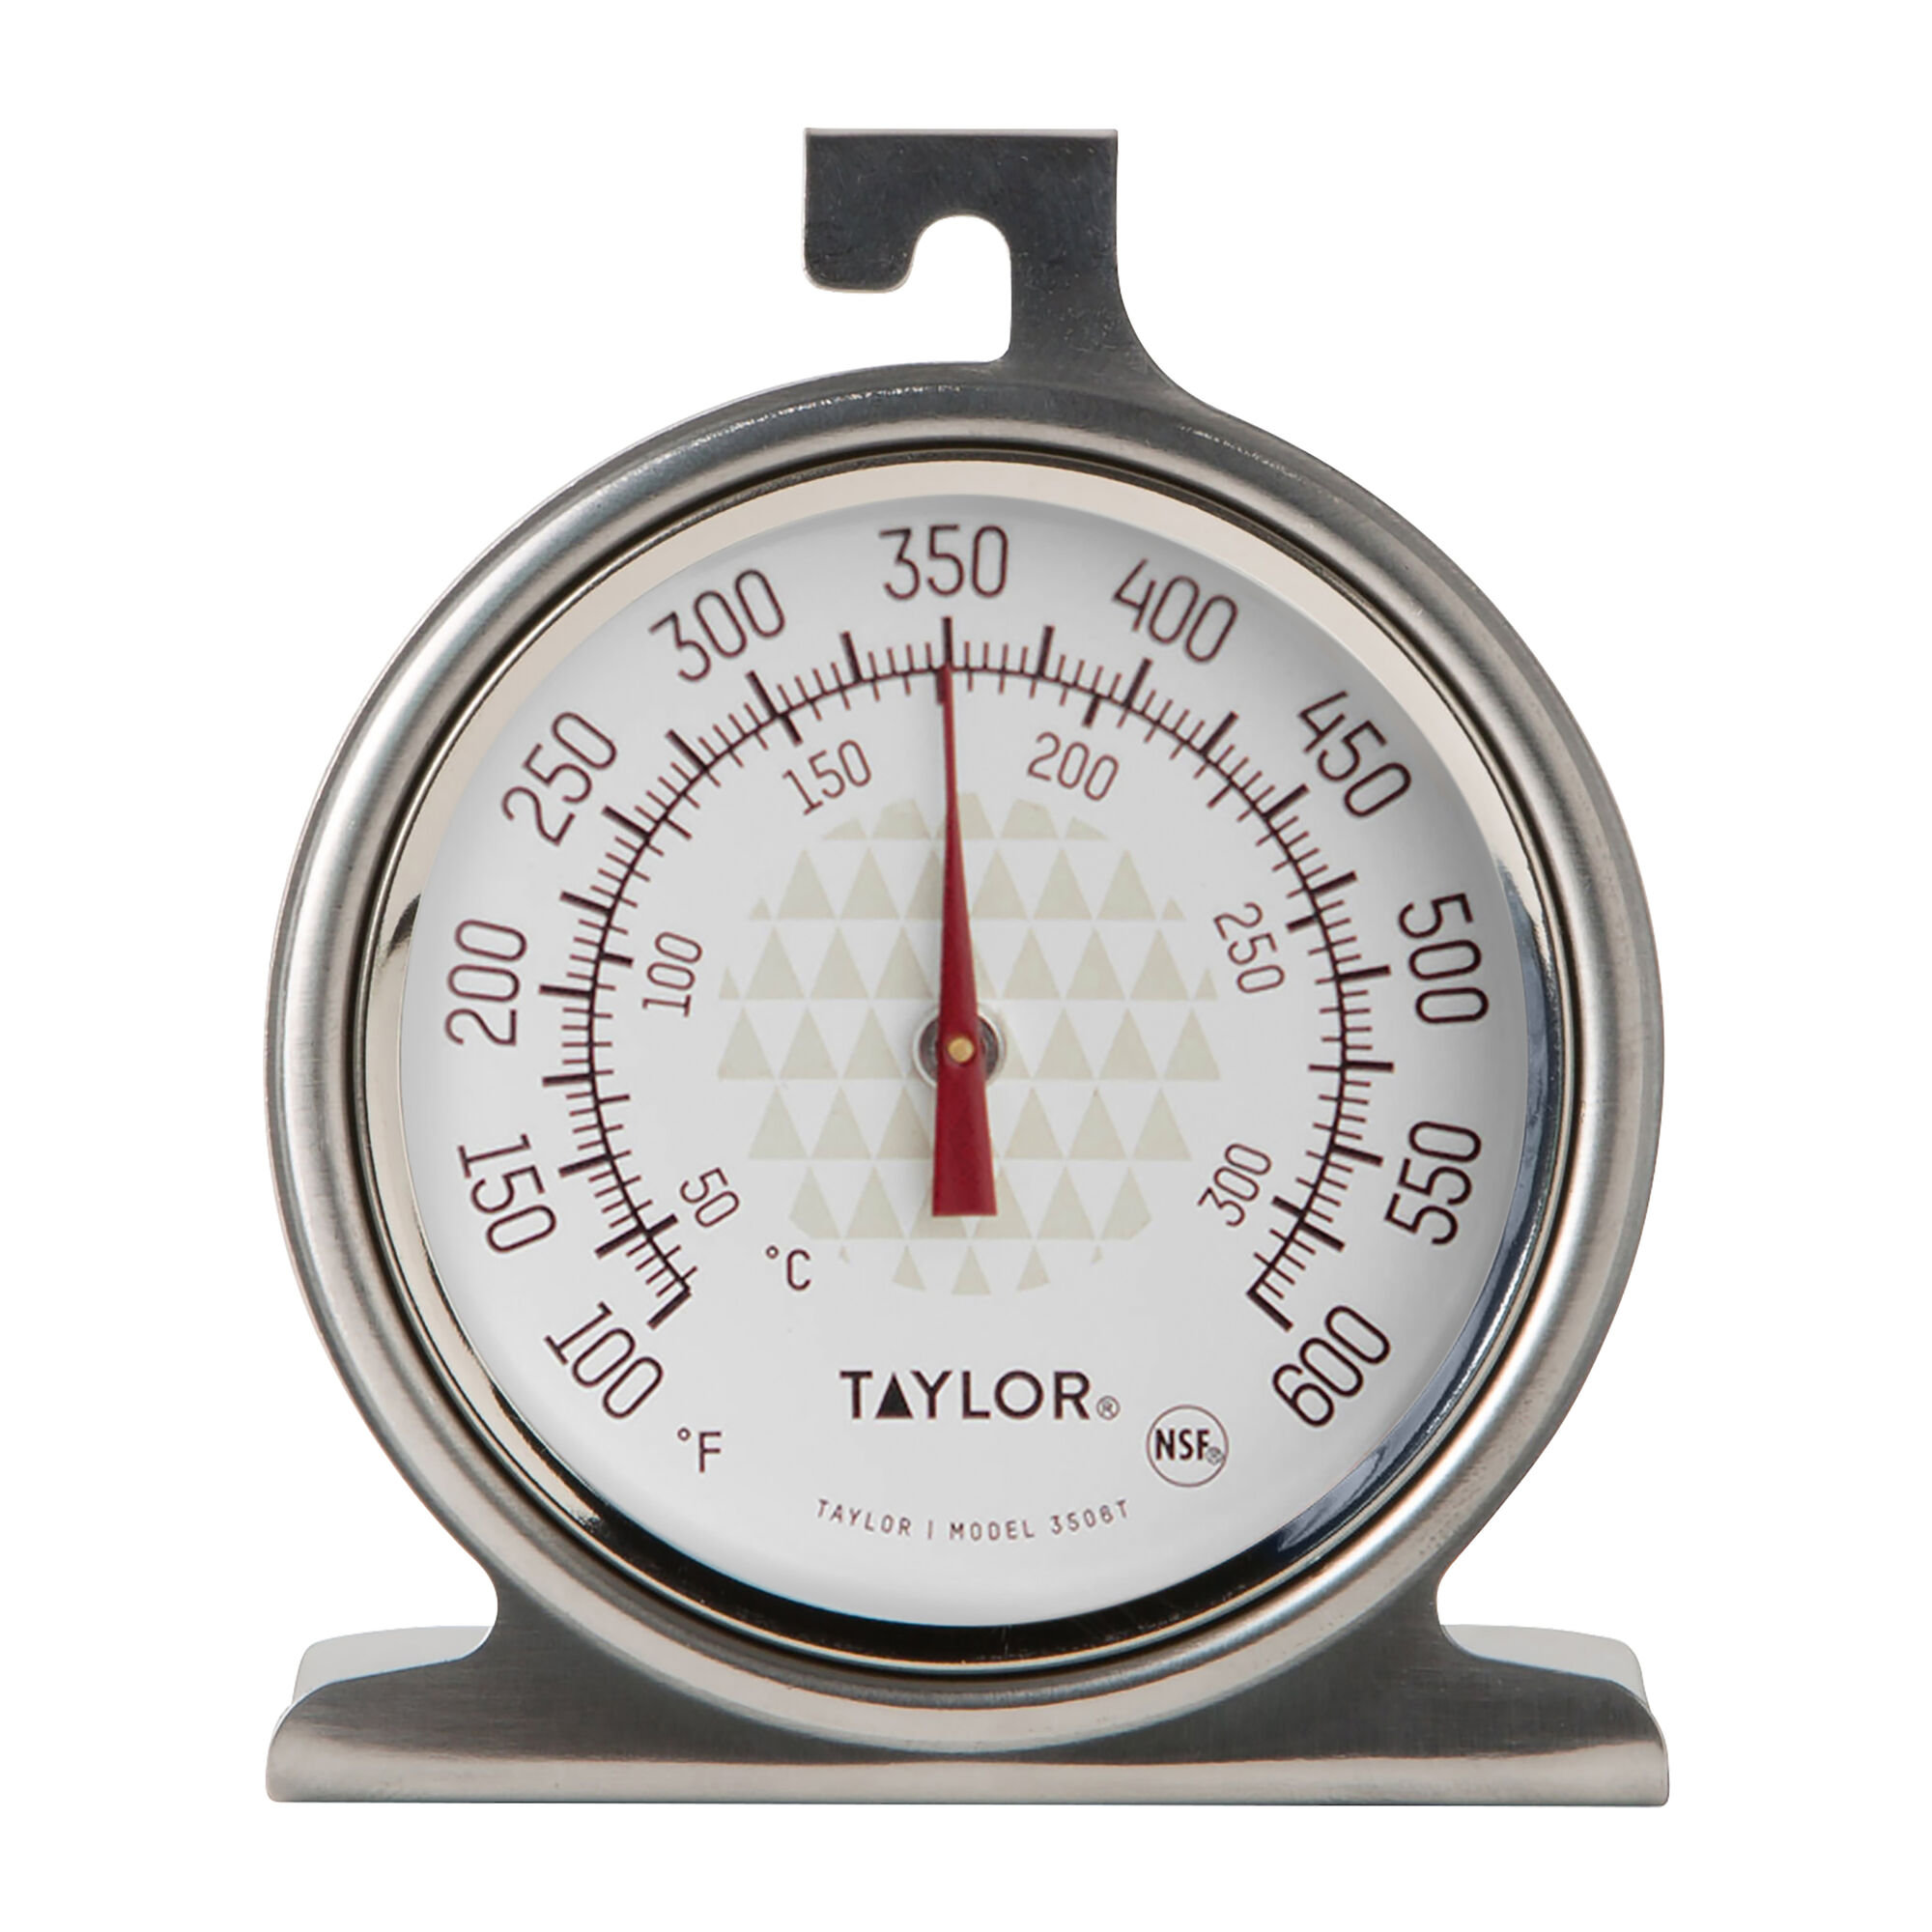 Deluxe BBQ Smoker Thermometer with Calibration - 3 Silver Dial